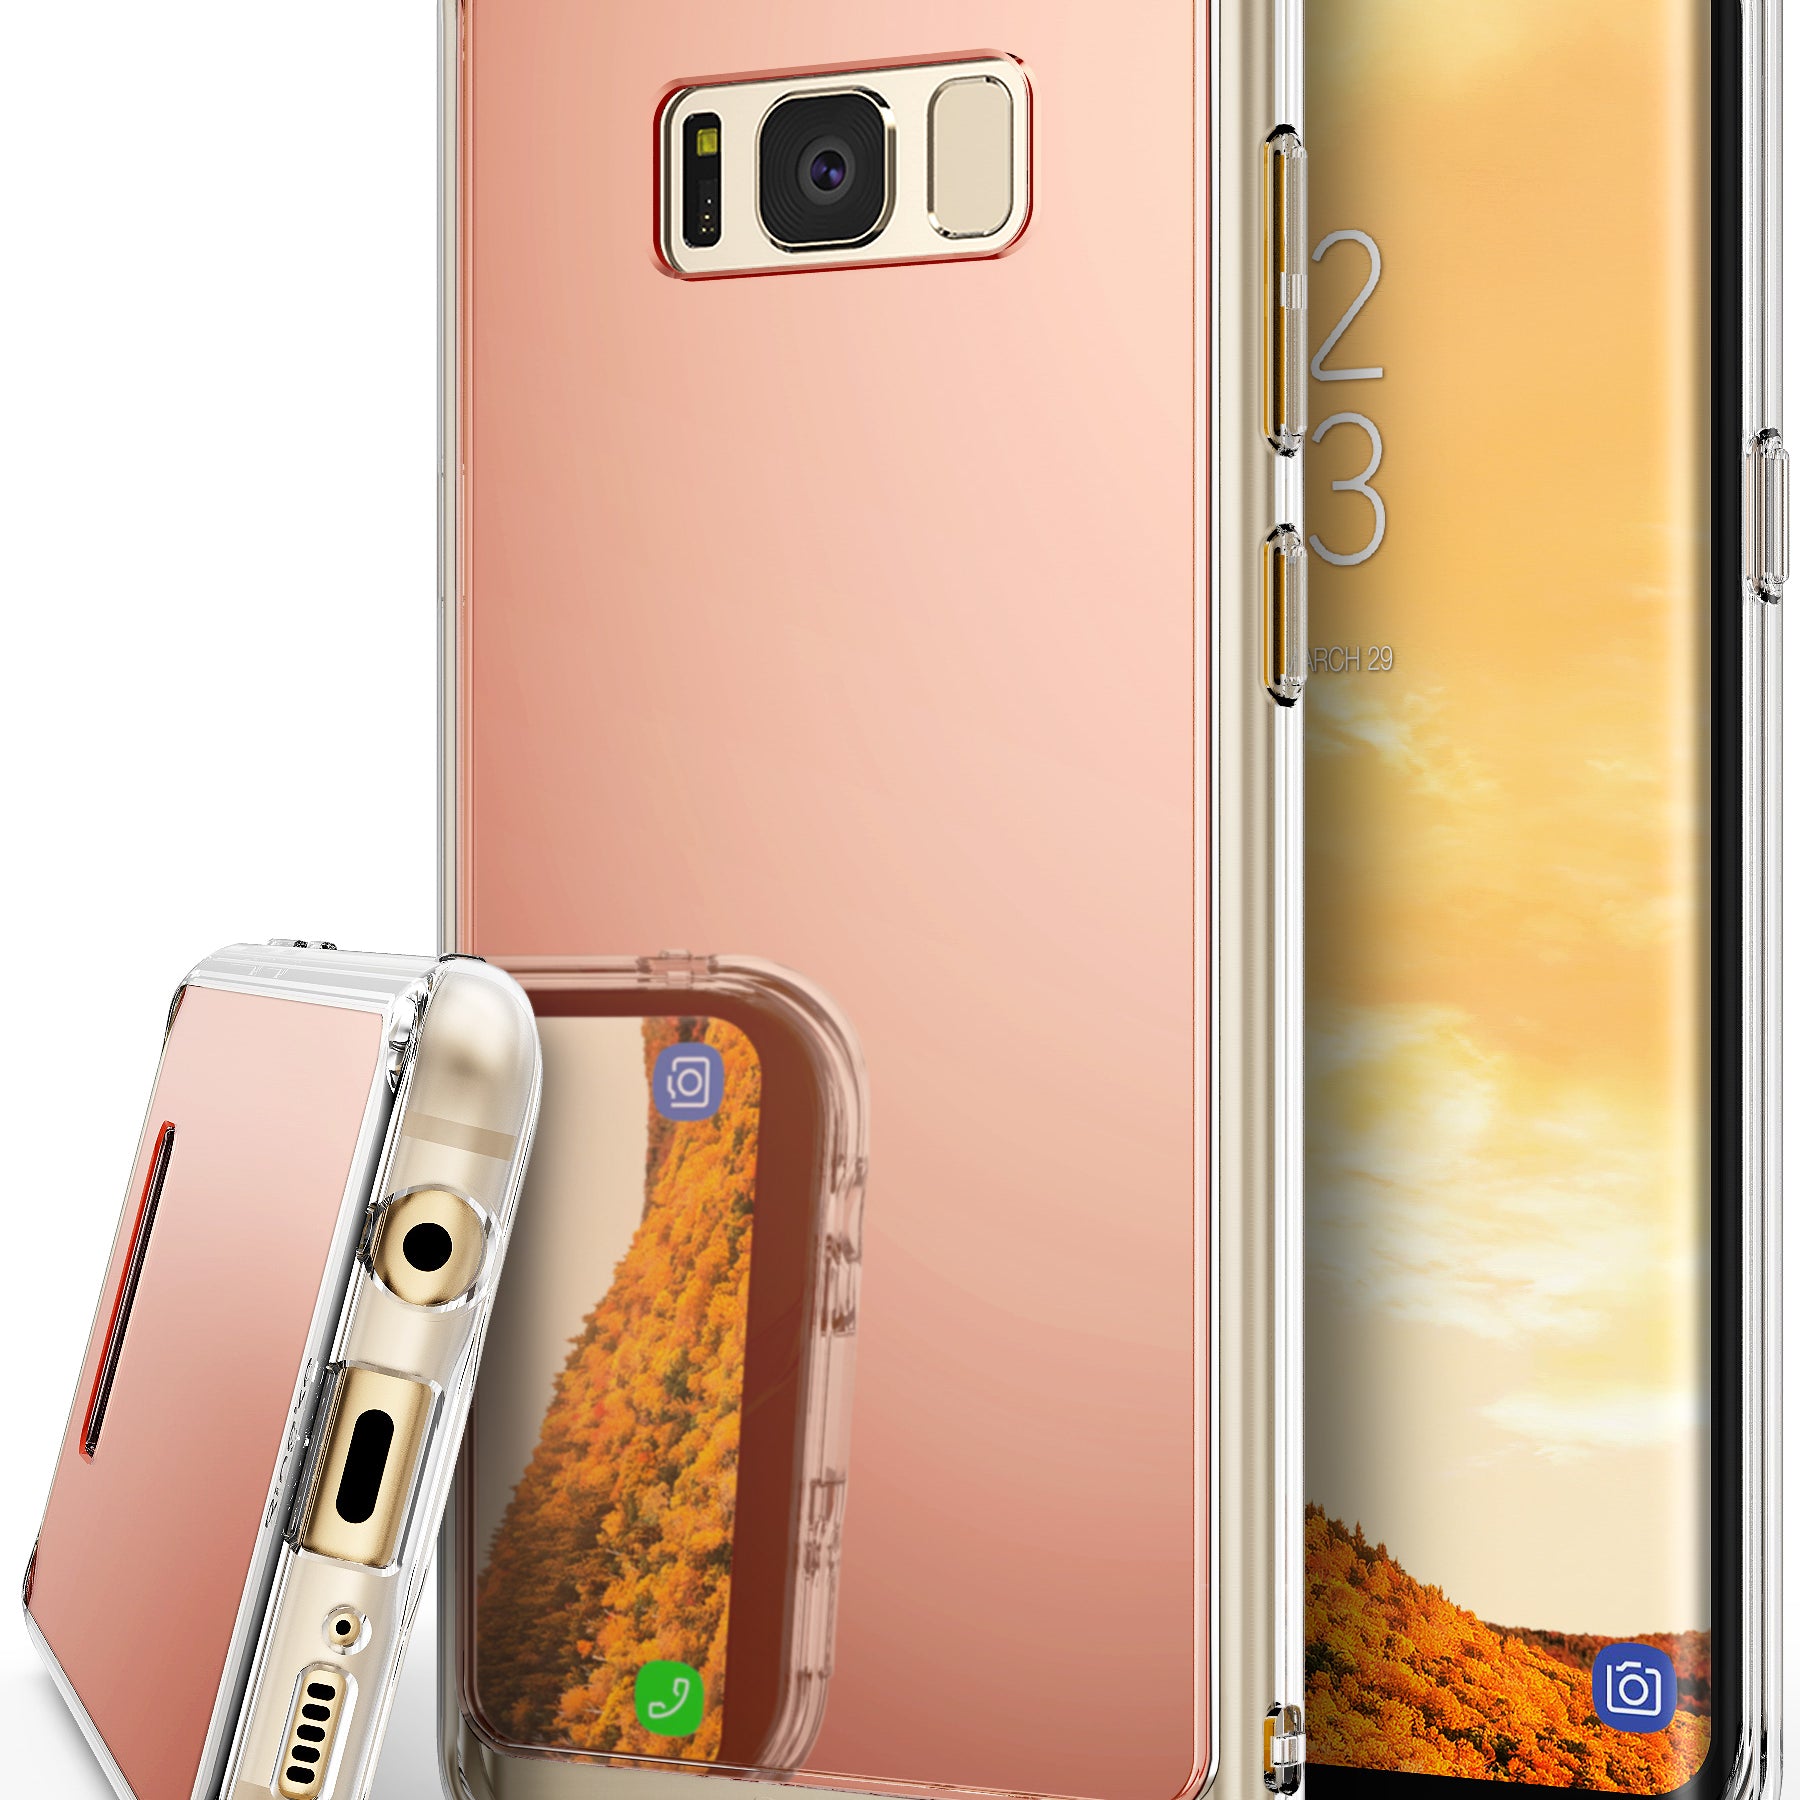 ringke mirror back cover case for galaxy s8 plus rose gold